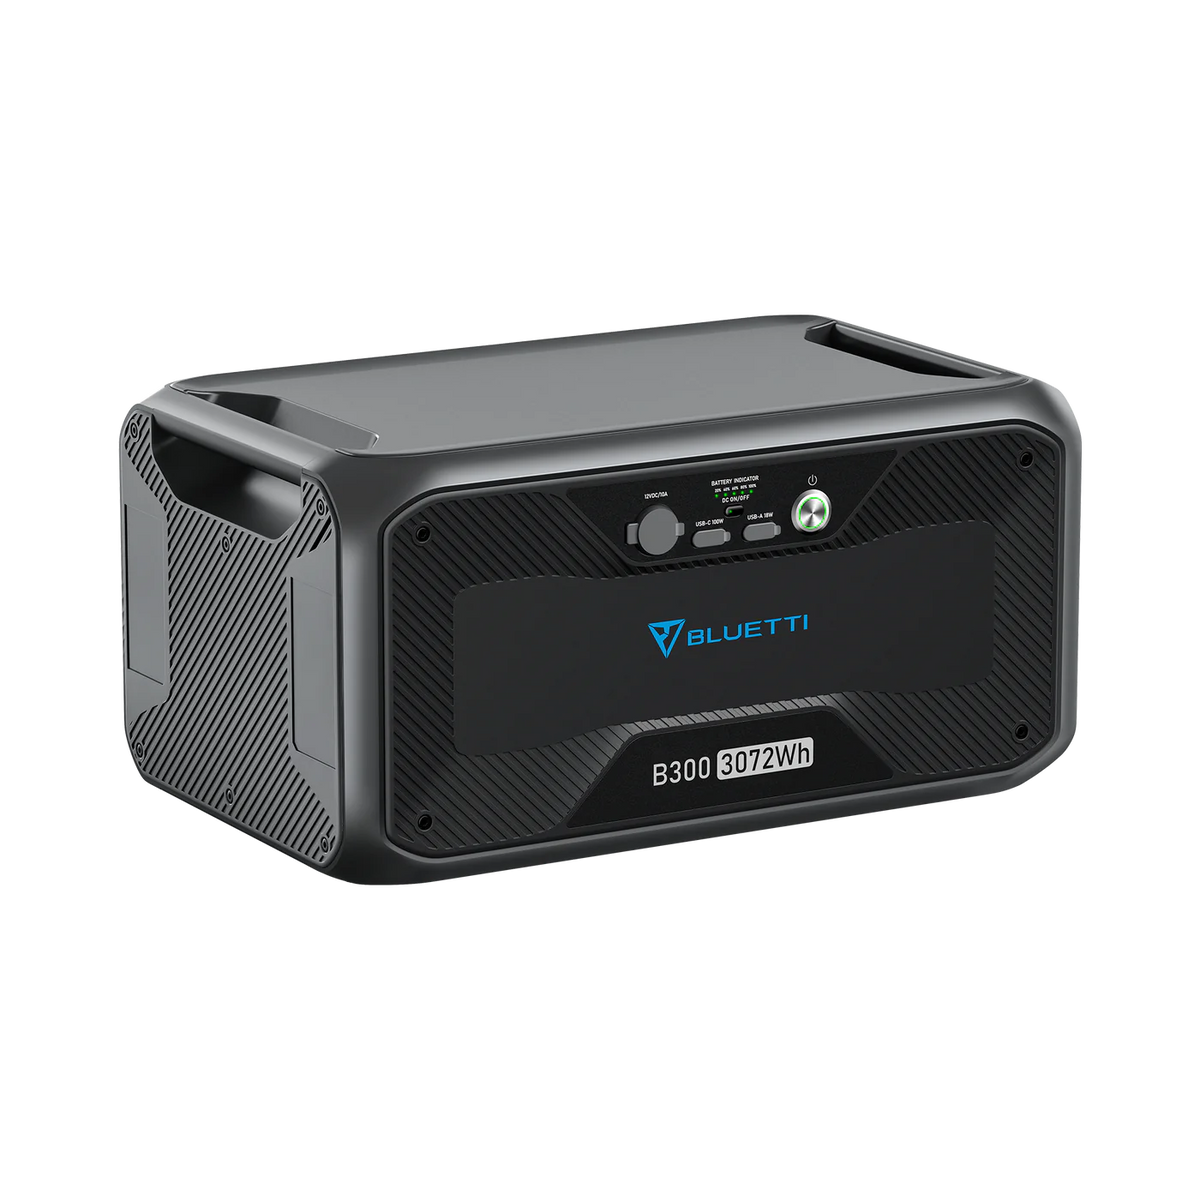 BLUETTI B300 Expansion Battery | 3072Wh